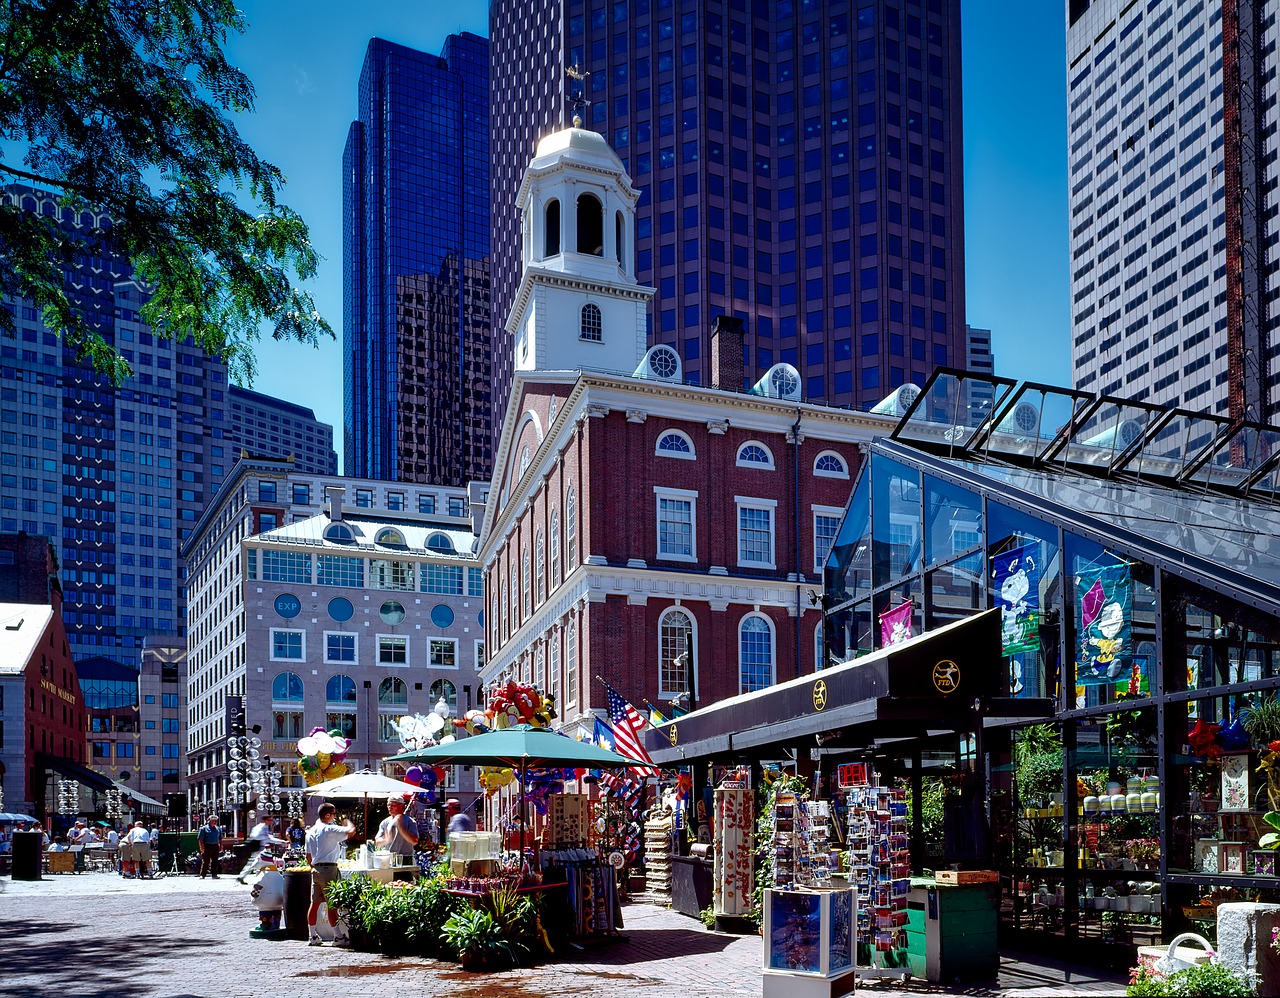 Faneuil Hall and merchant pushcarts in downtown Boston